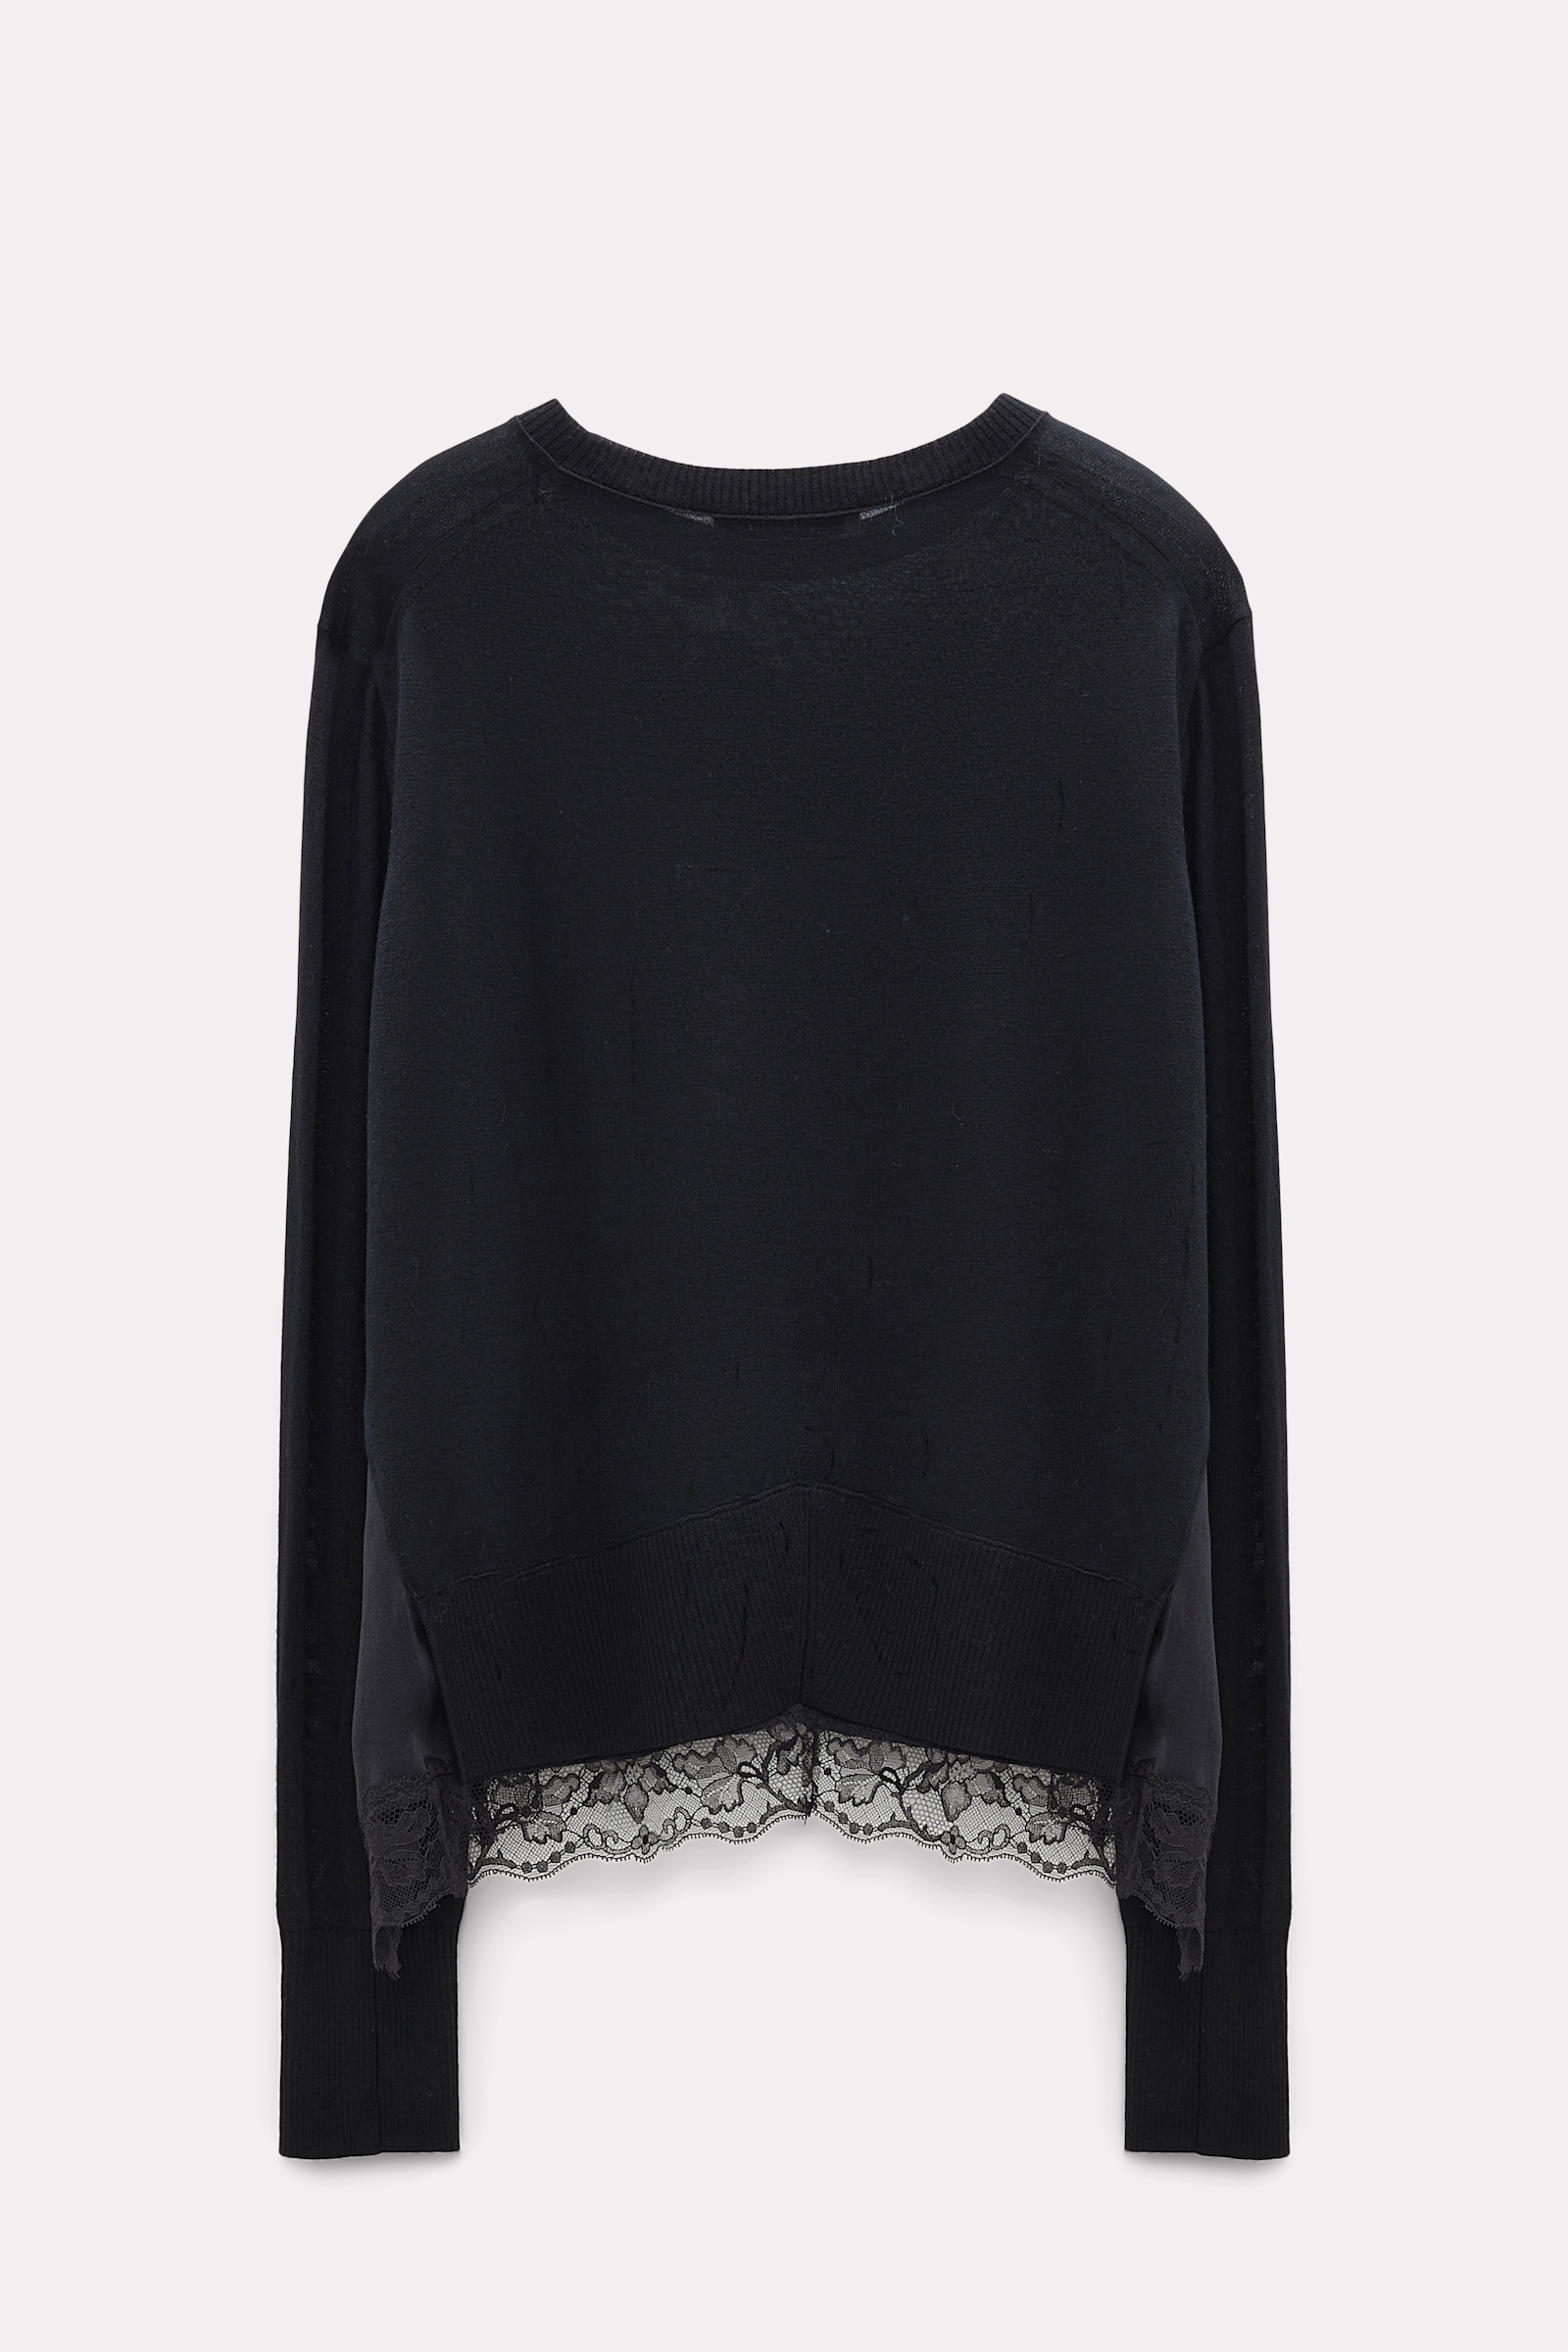 Dorothee Schumacher Sweater with satin and lace pure black